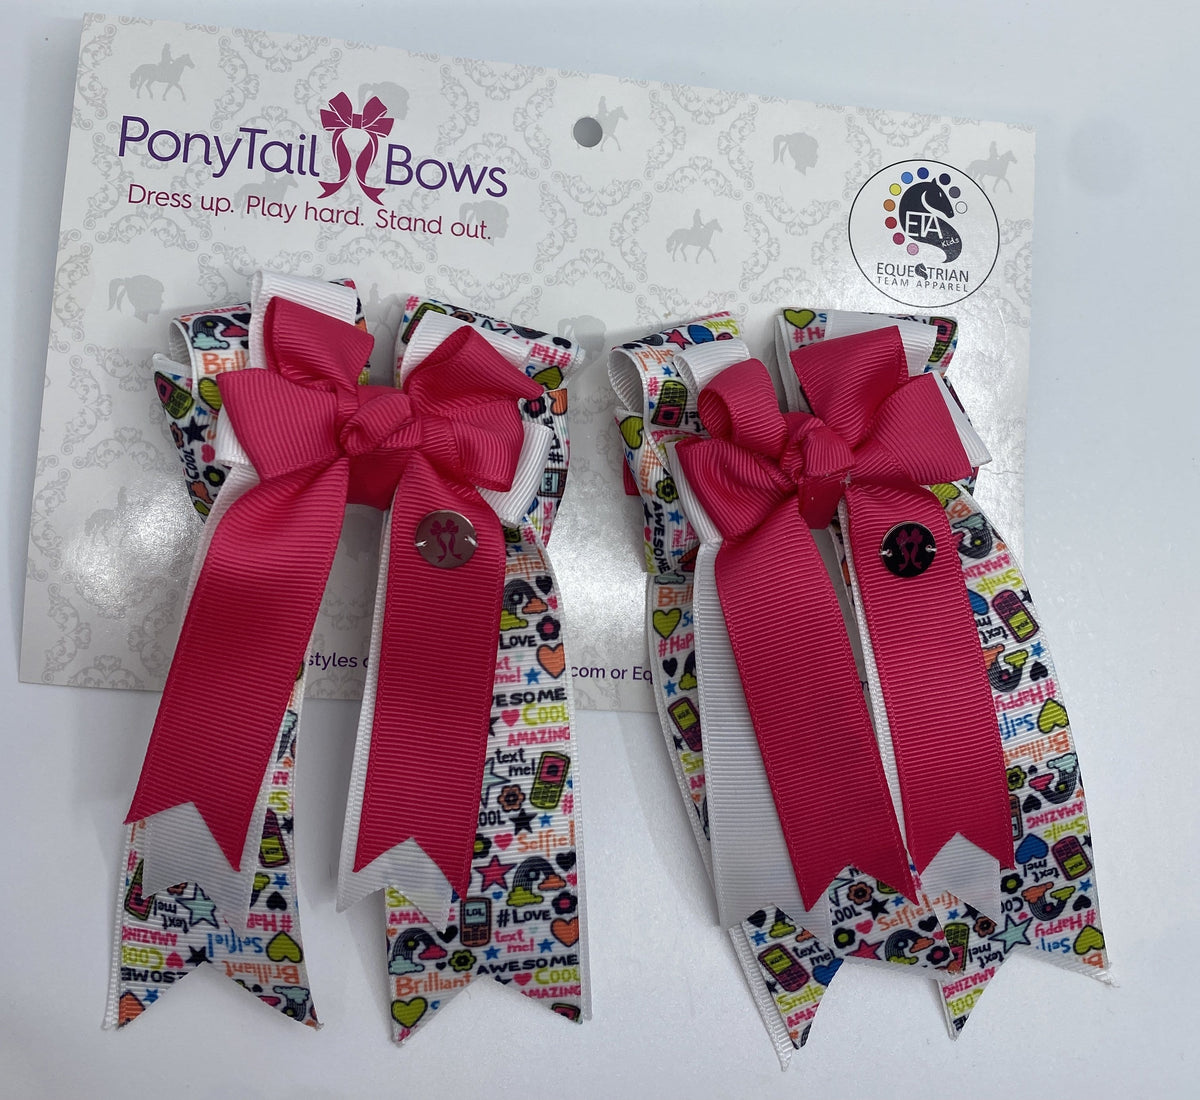 PonyTail Bows 3" Tails All The Things Pink PonyTail Bows equestrian team apparel online tack store mobile tack store custom farm apparel custom show stable clothing equestrian lifestyle horse show clothing riding clothes PonyTail Bows | Equestrian Hair Accessories horses equestrian tack store